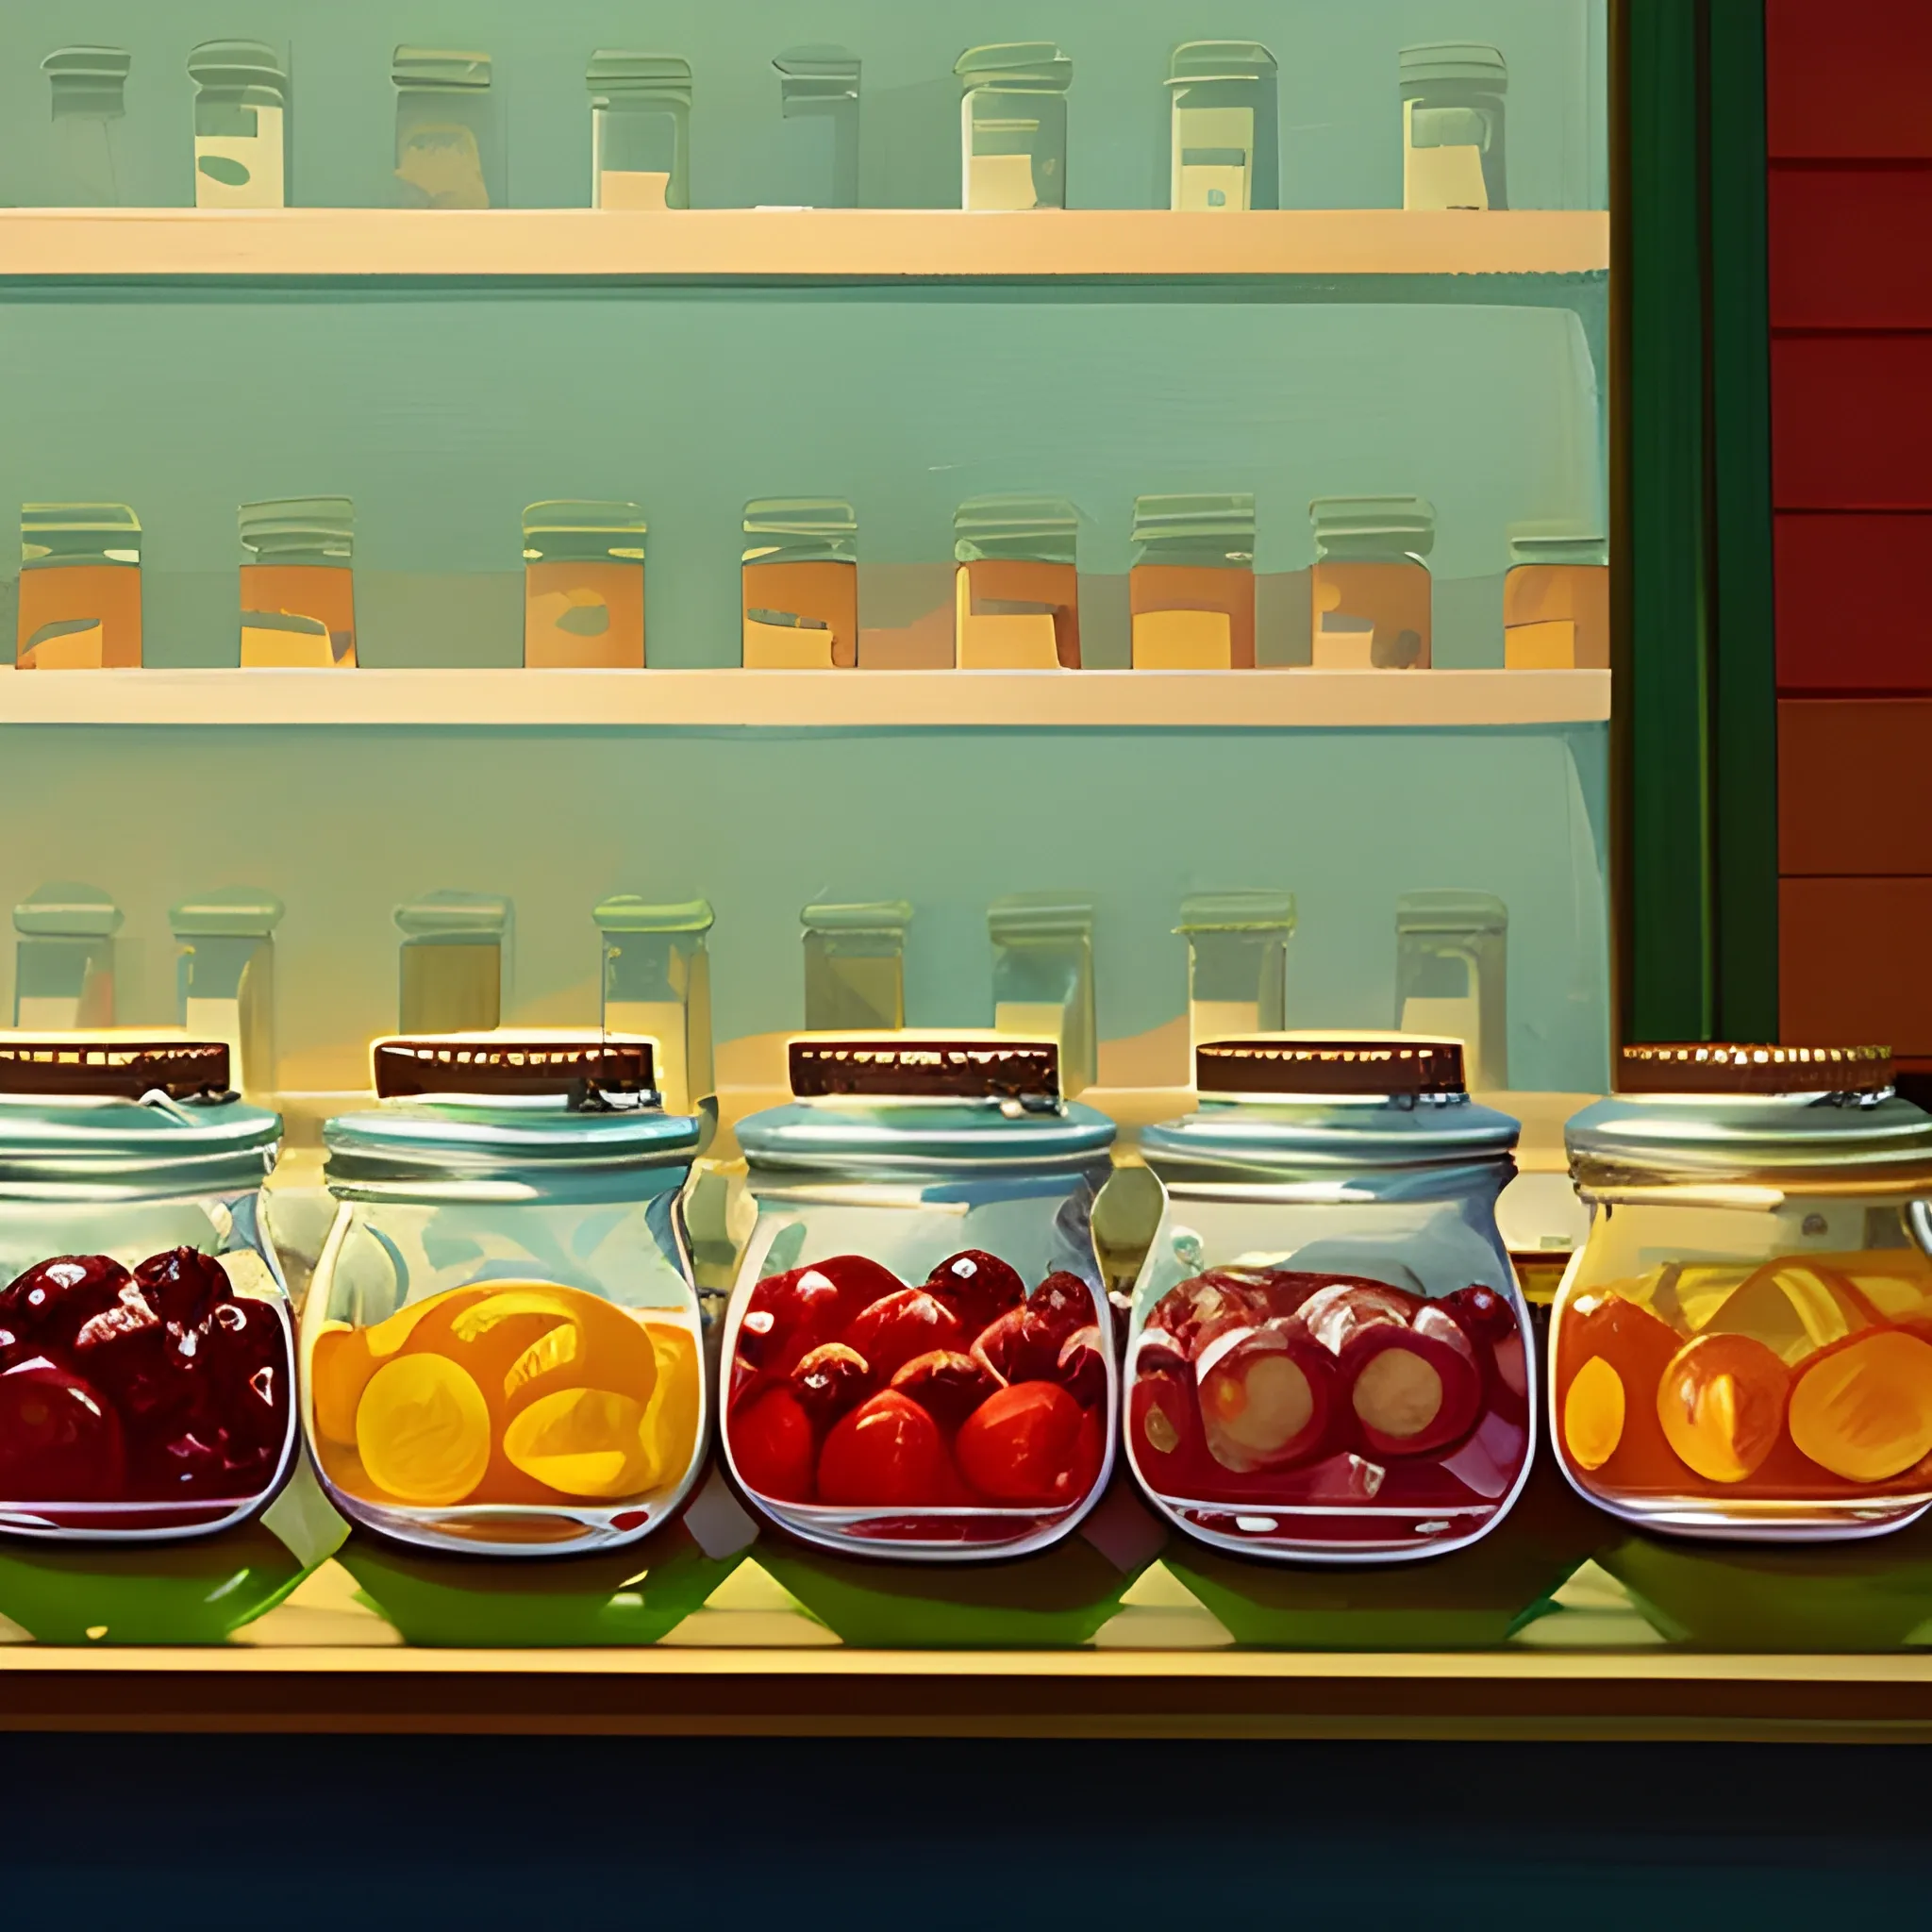 close up view of general store shelf with many jars, fruit jams, painted by Edward Hopper, painted by James Gilleard